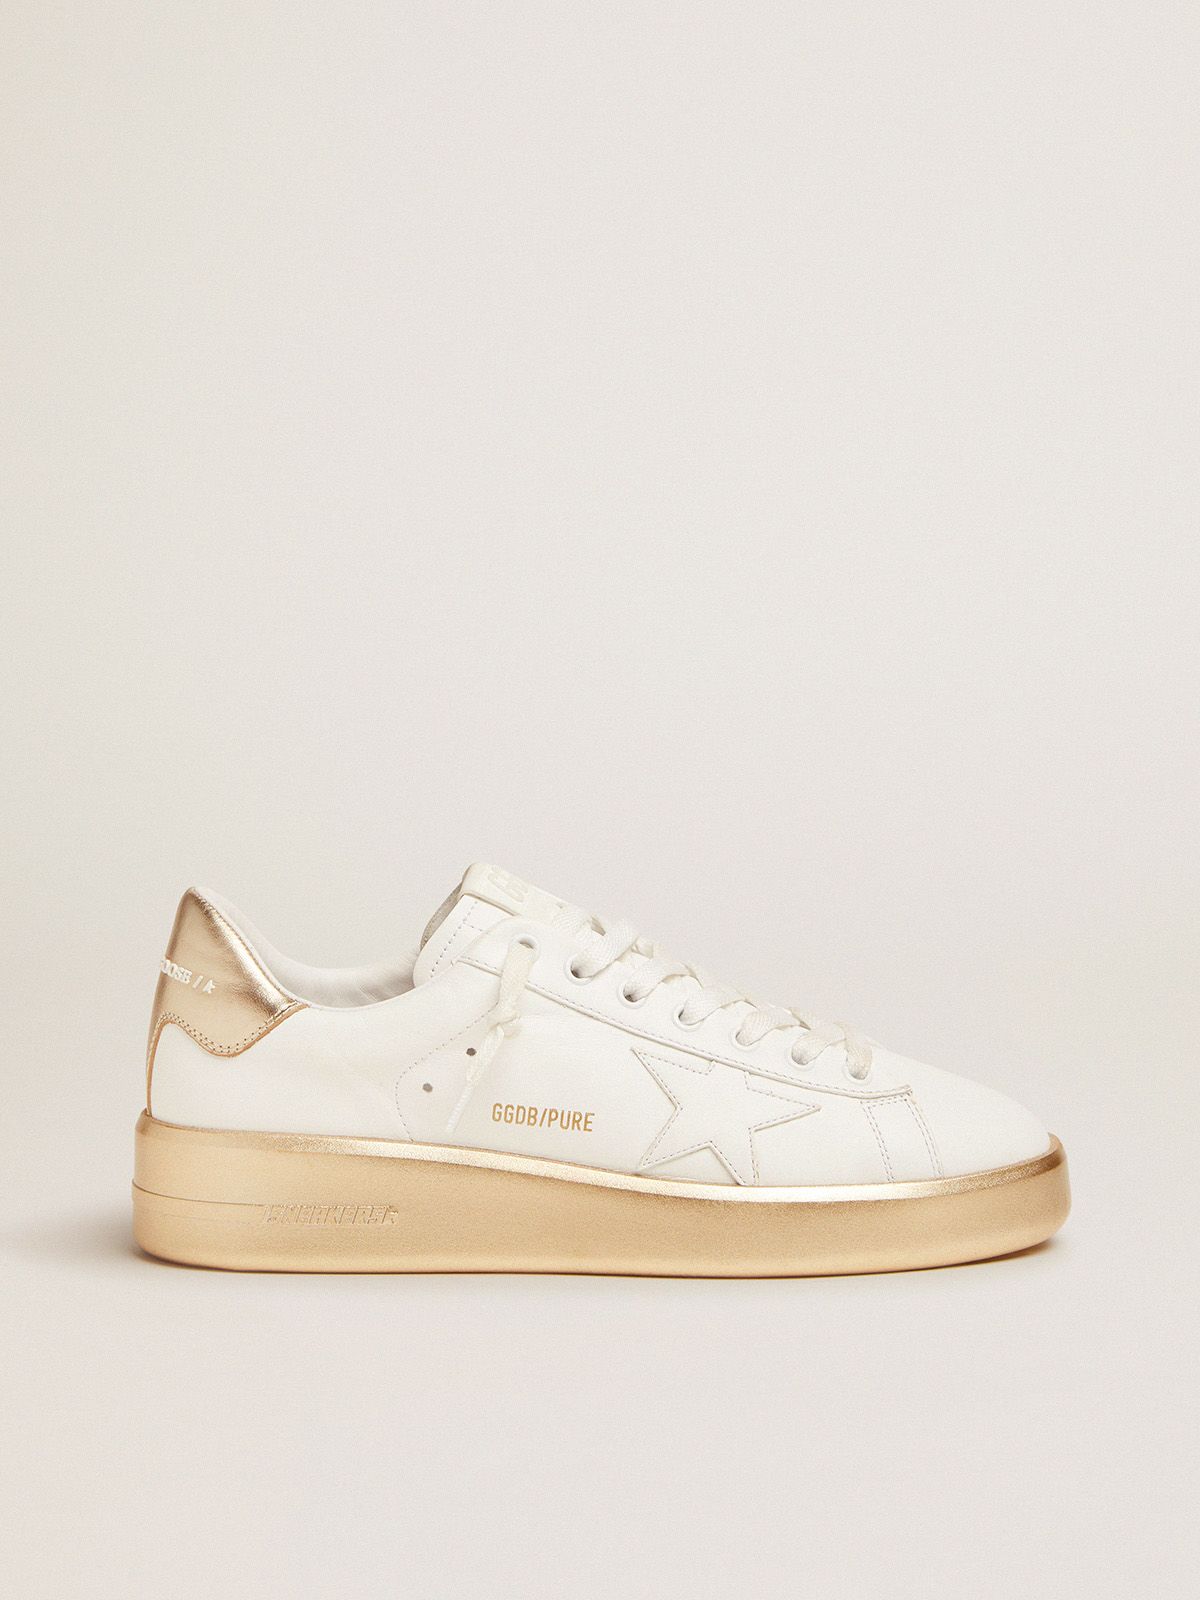 Sneakers Golden Goose Purestar sneakers in white leather with foxing and gold laminated leather heel tab